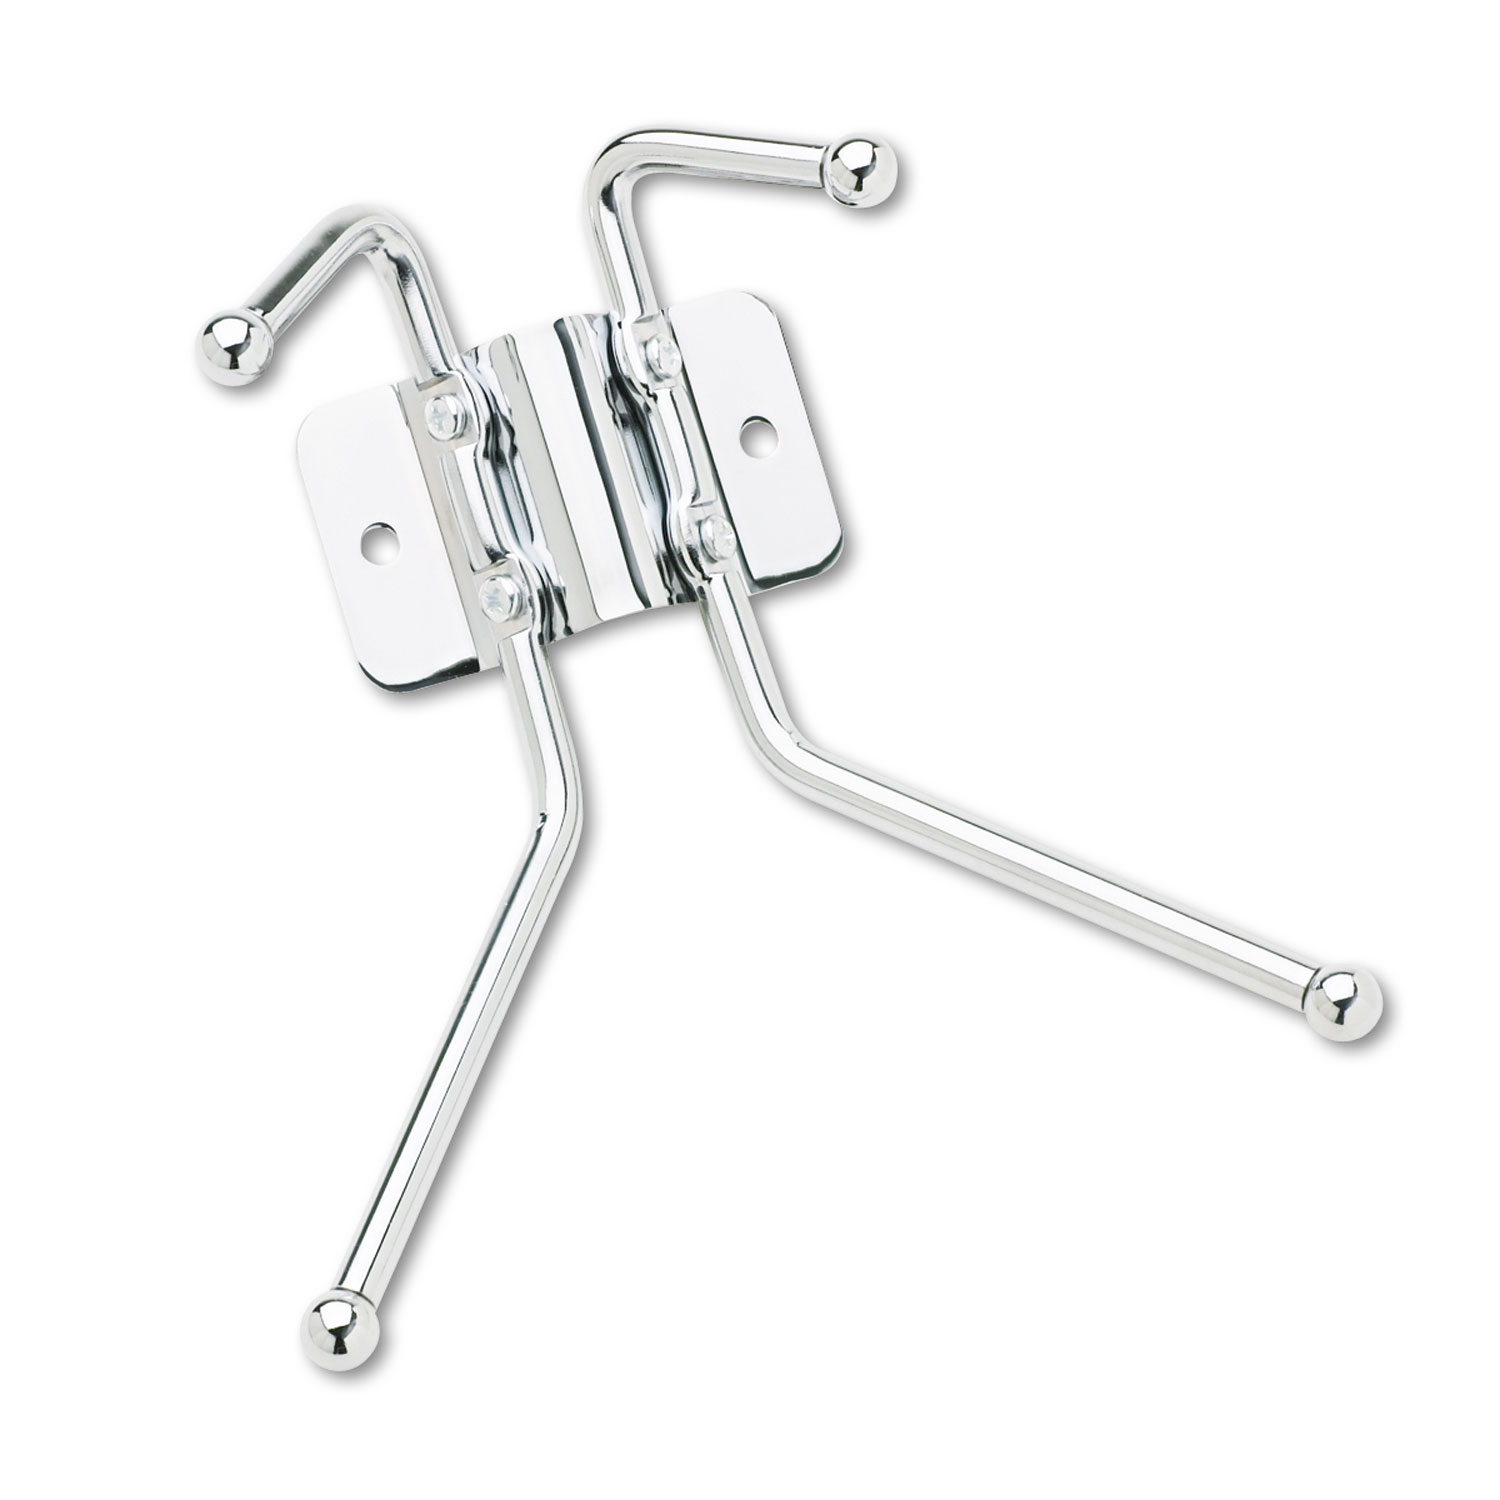 Safco SAF4160 Metal Wall Rack, Two Ball-Tipped Double-Hooks, 6-1/2w x 3d x 7h, Chrome Metal